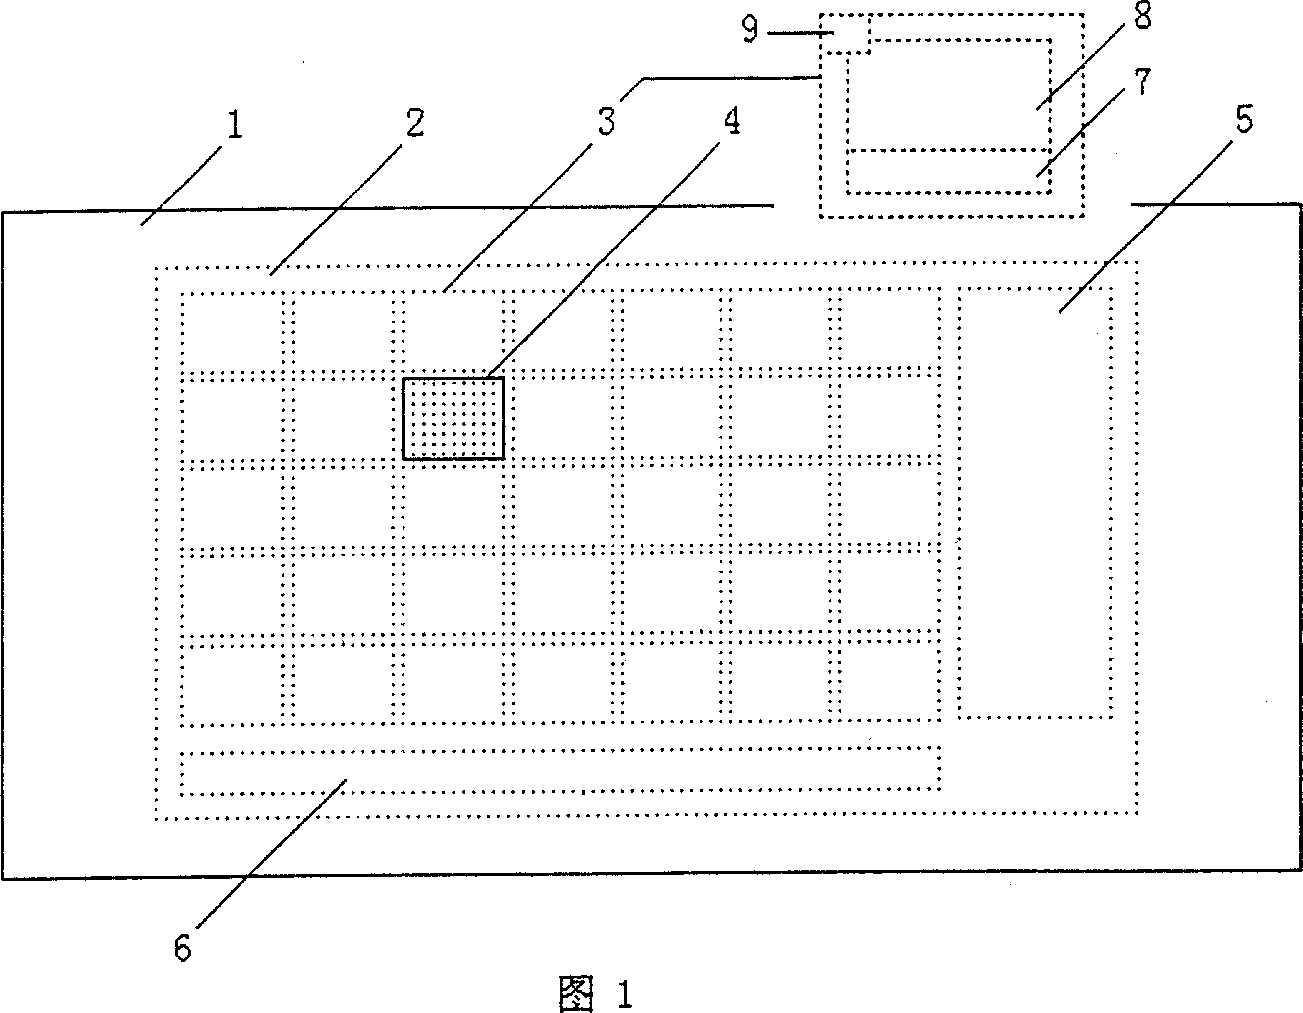 Method for audio-visual remote control of digital television display screen user interface